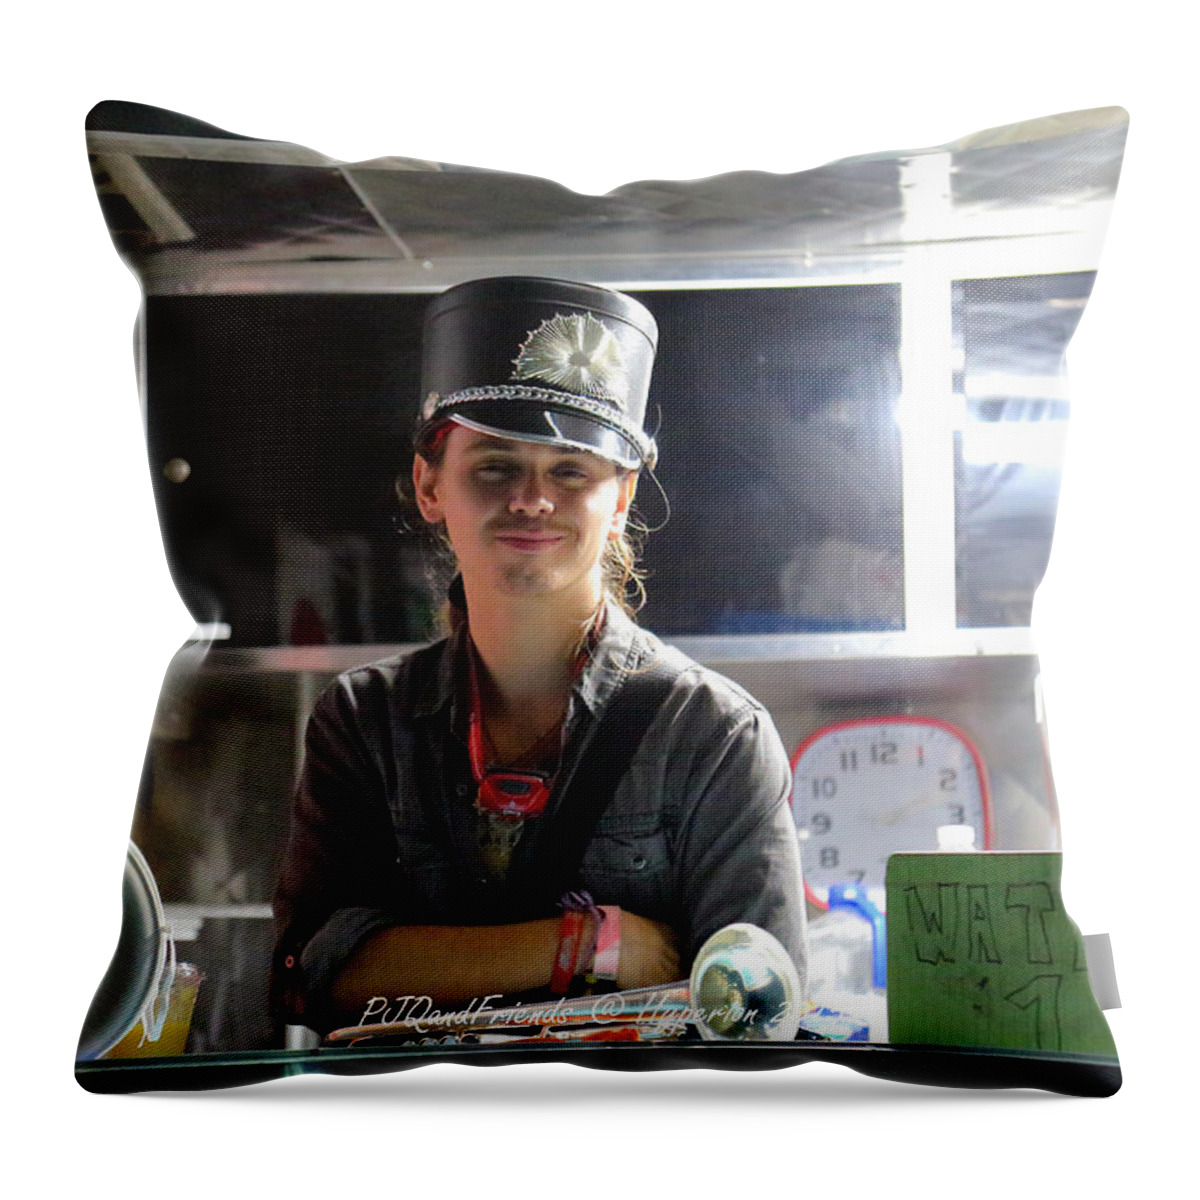 Hyperion Music And Arts Festival 2015 Throw Pillow featuring the photograph Hyperion Music and Arts Festival 2015 #6 by PJQandFriends Photography